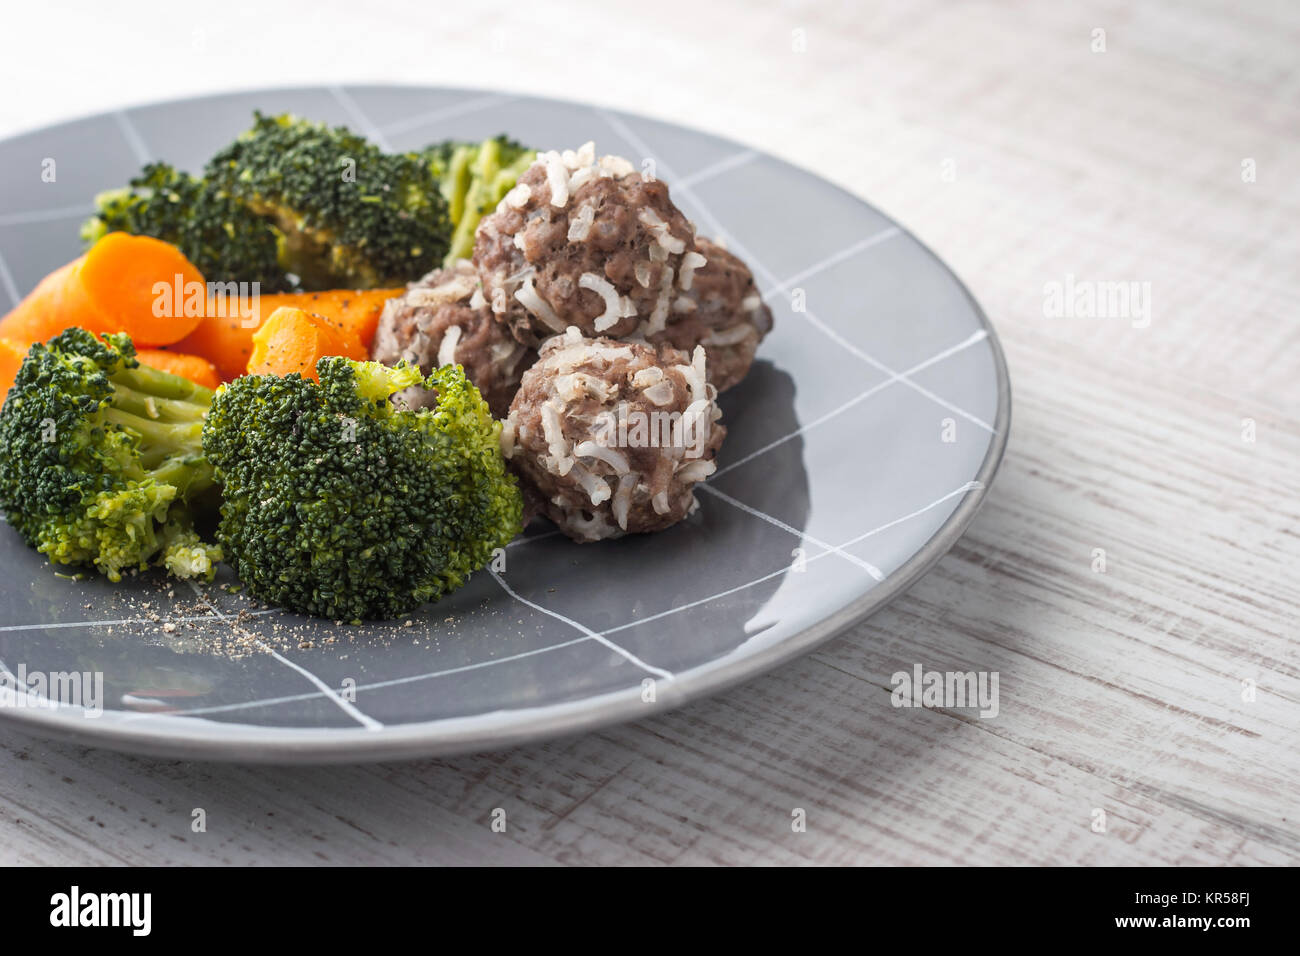 Steamed vegetables with meatballs on the gray plate Stock Photo